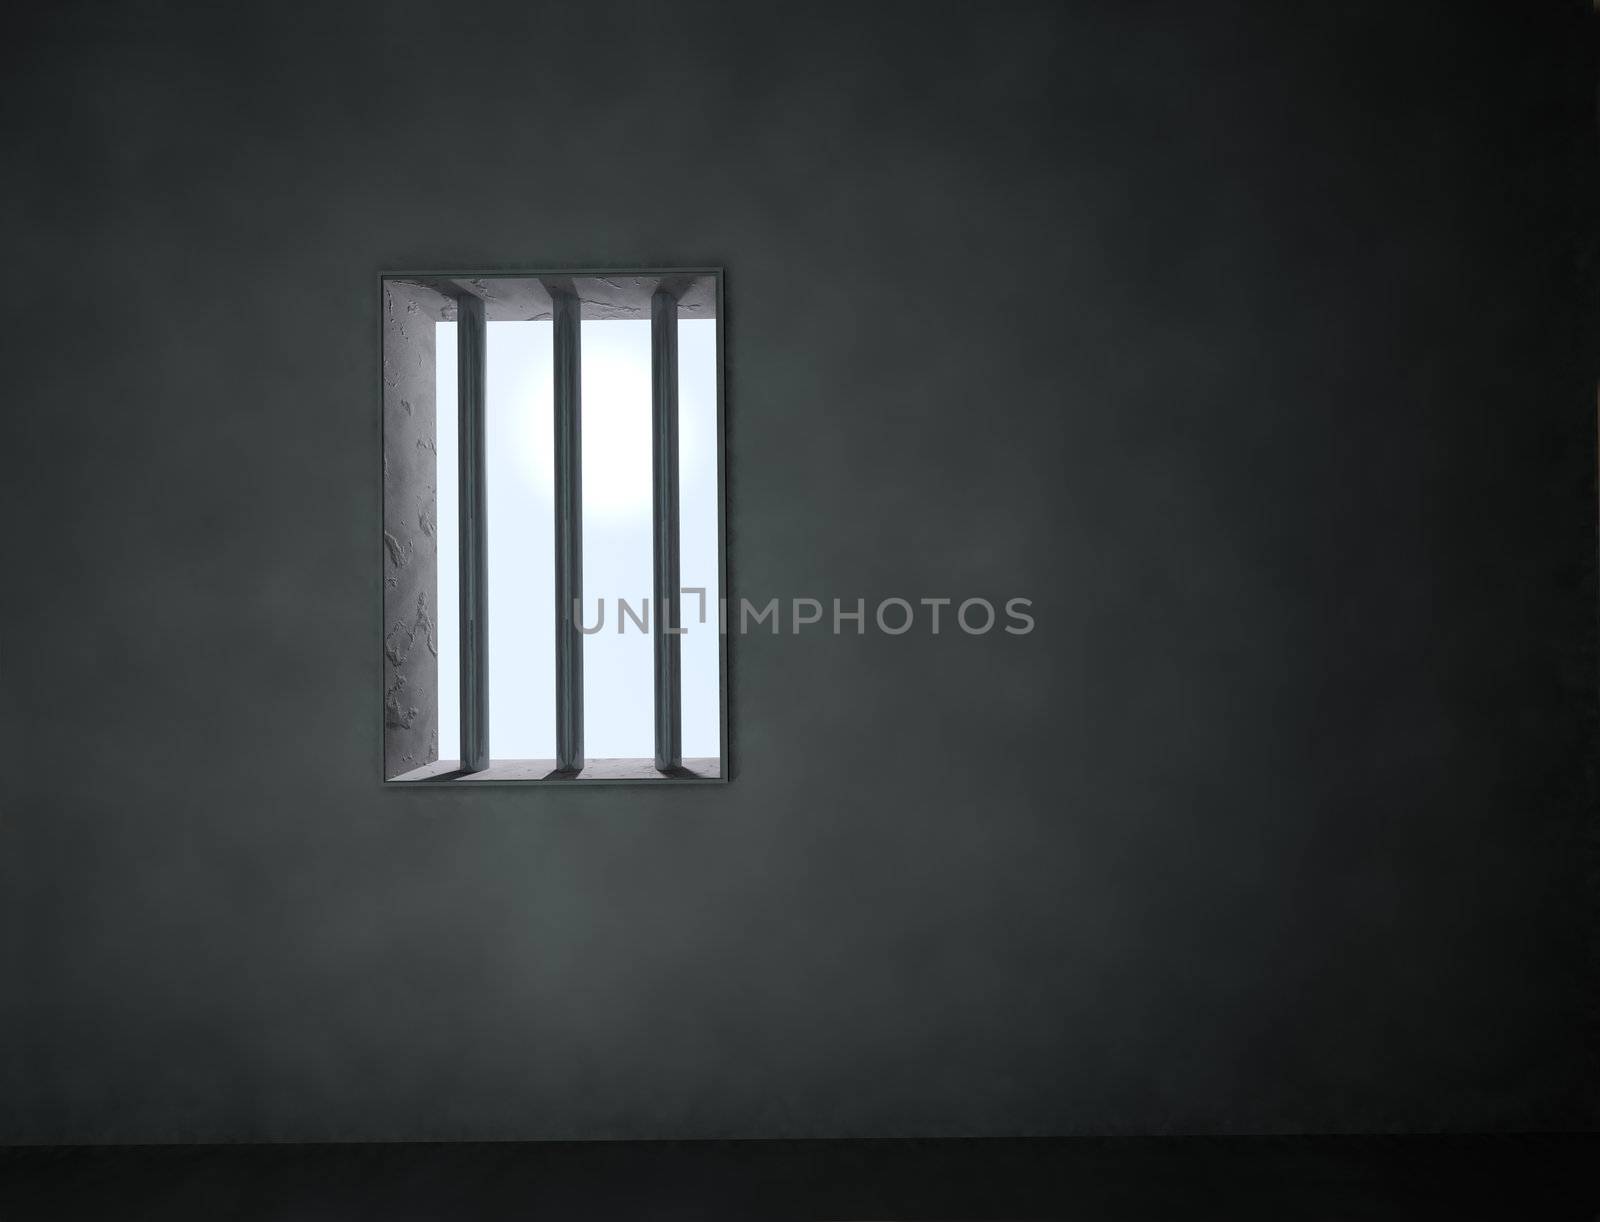 3d arquitecture background with bars of a jail